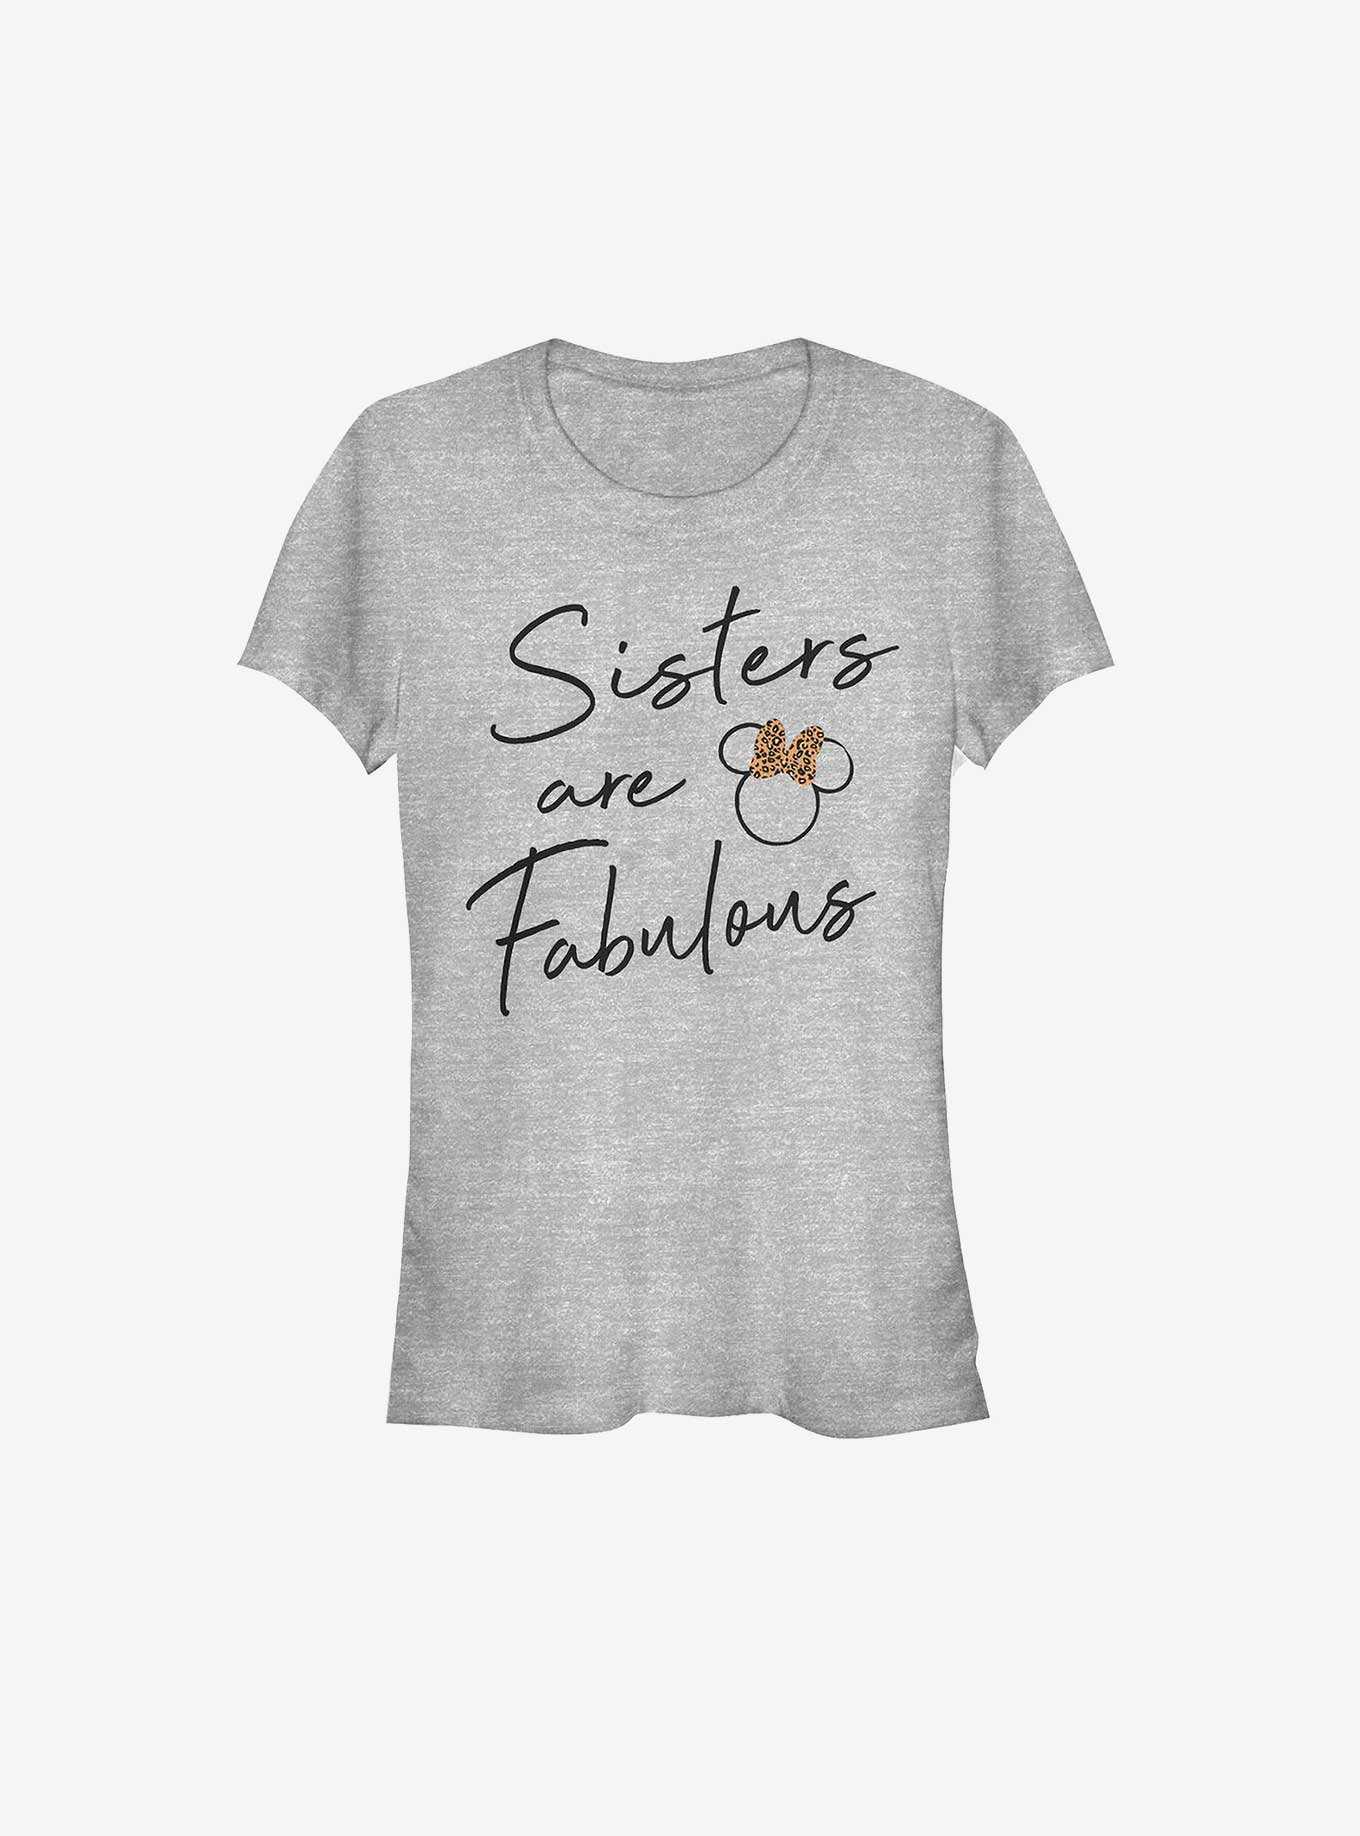 Disney Minnie Mouse Sisters Are Fabulous Girls T-Shirt, , hi-res